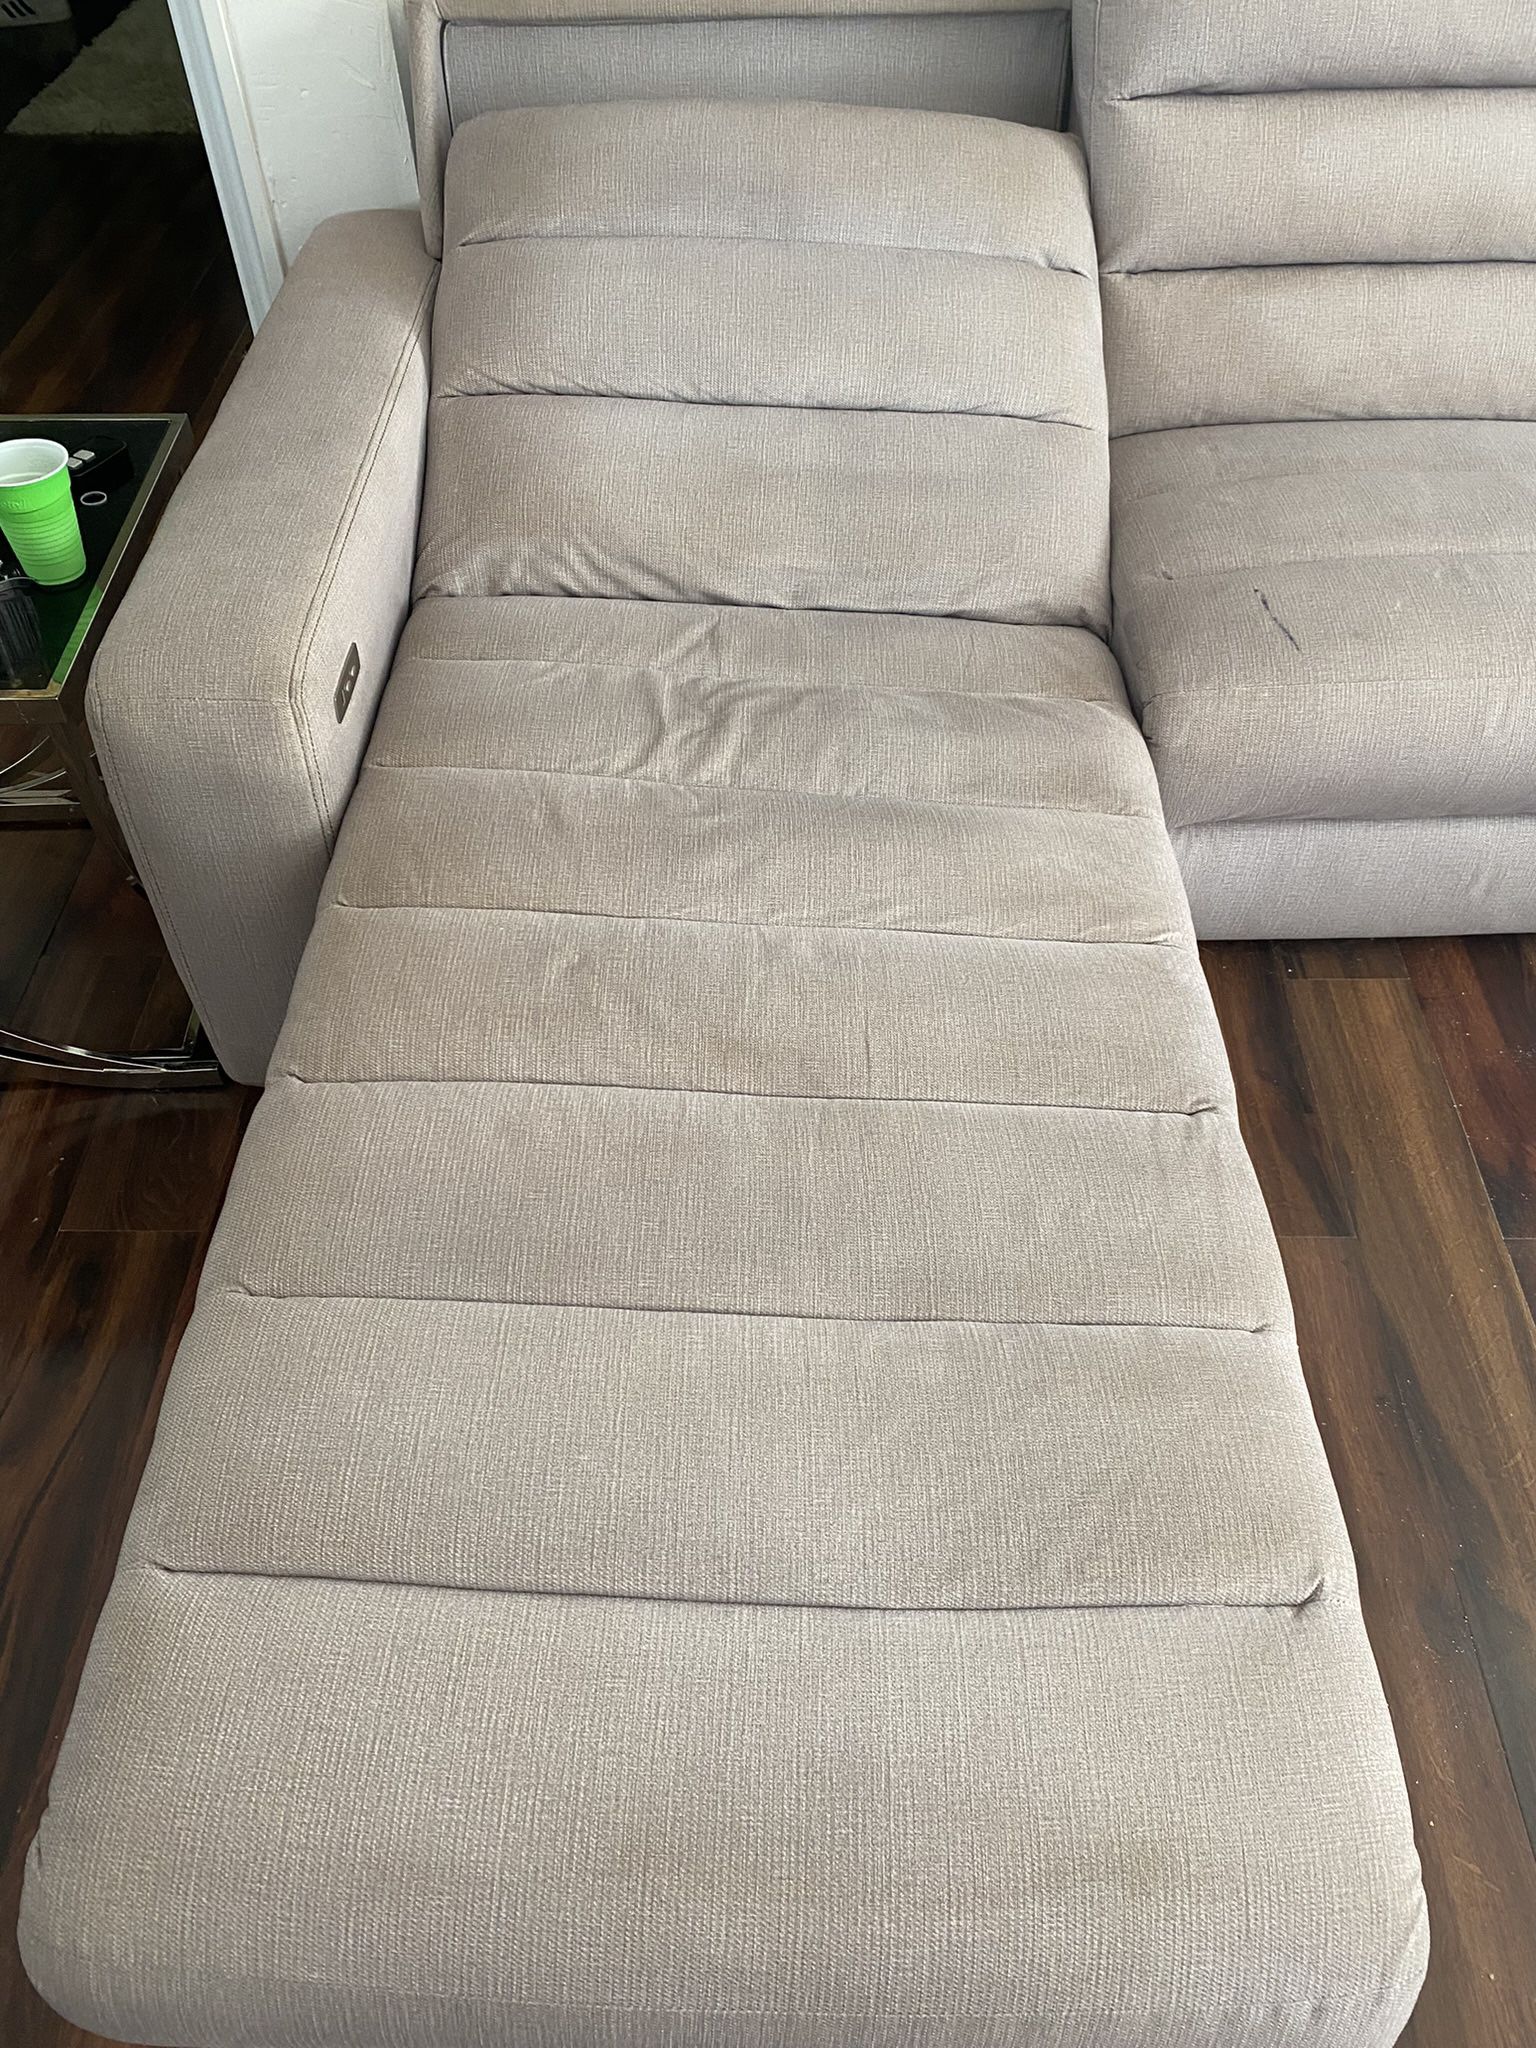 6 Piece Tan Sectional Couch